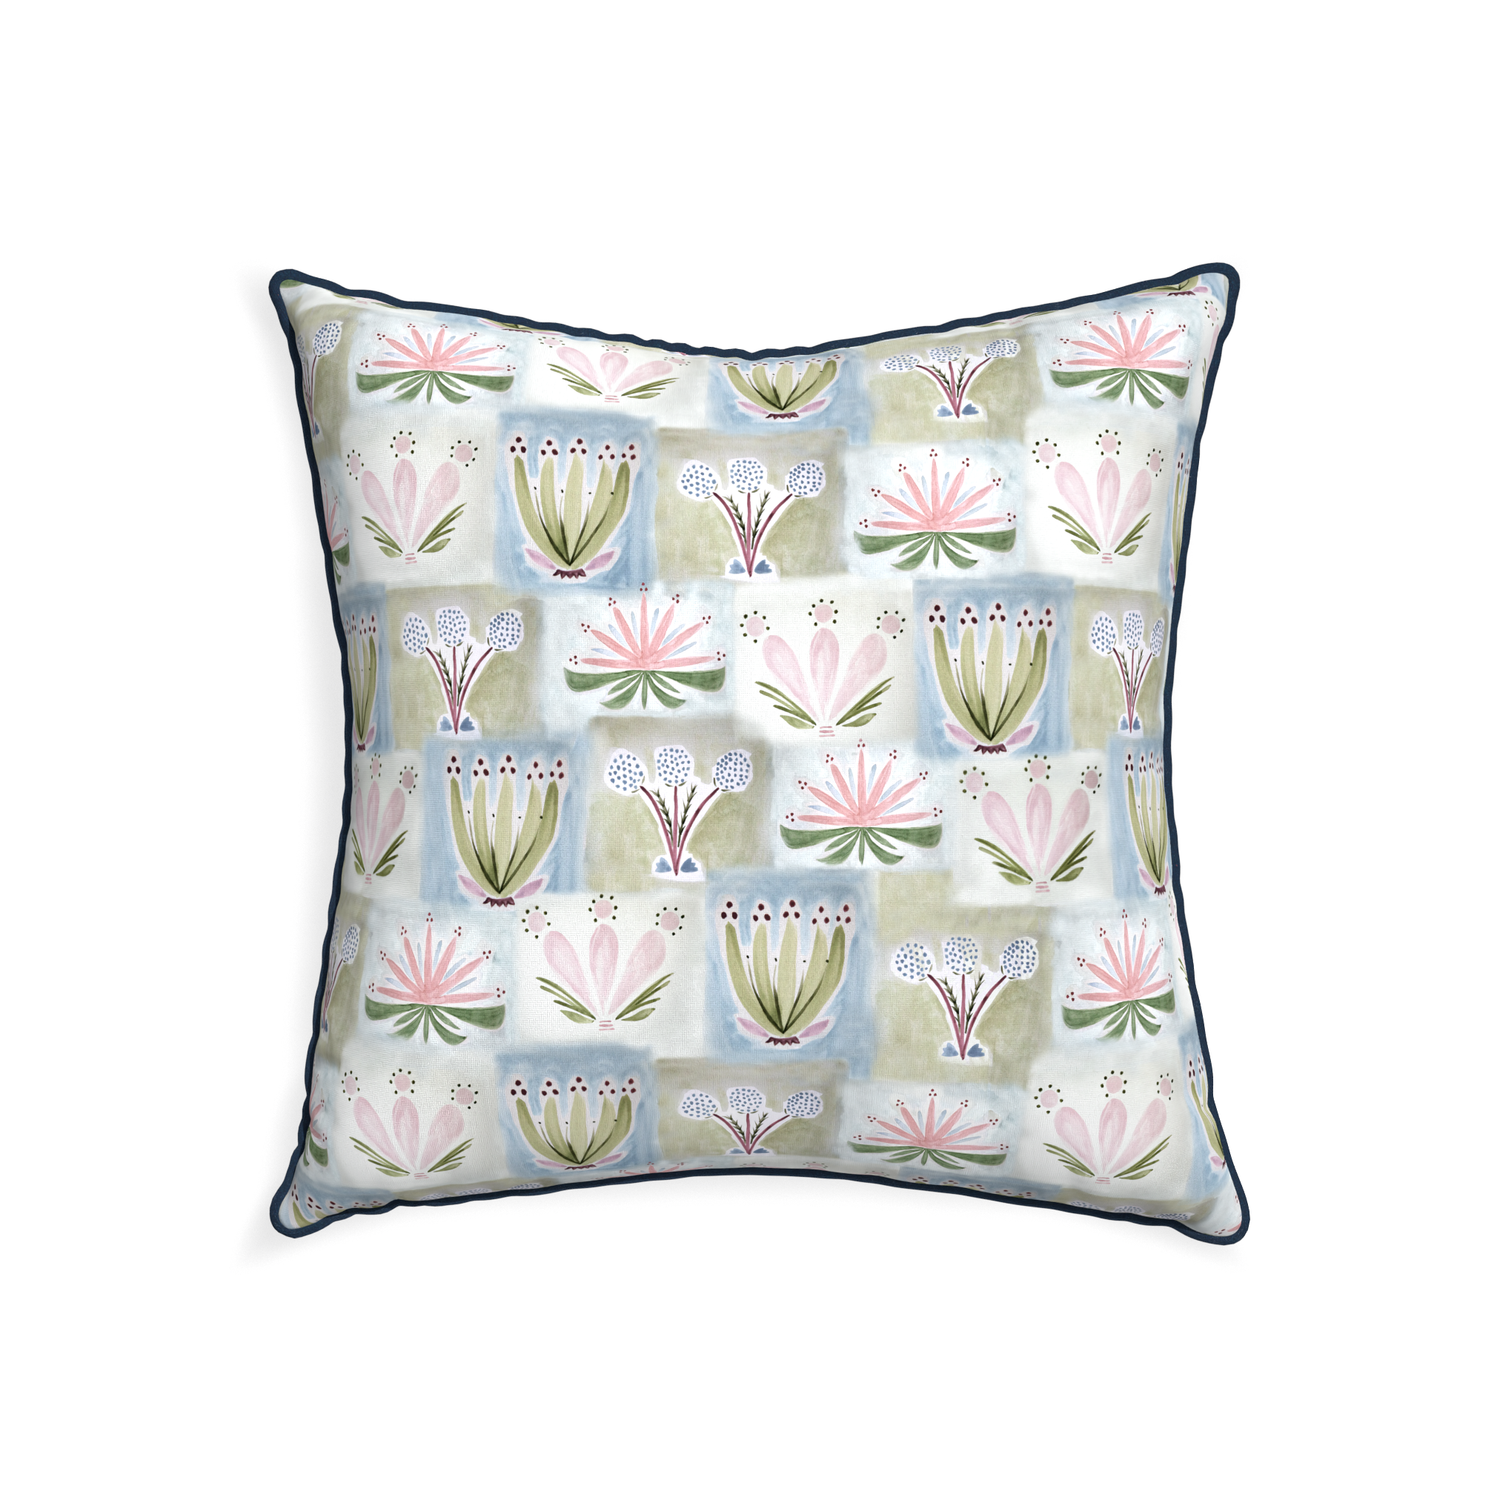 22-square harper custom hand-painted floralpillow with c piping on white background